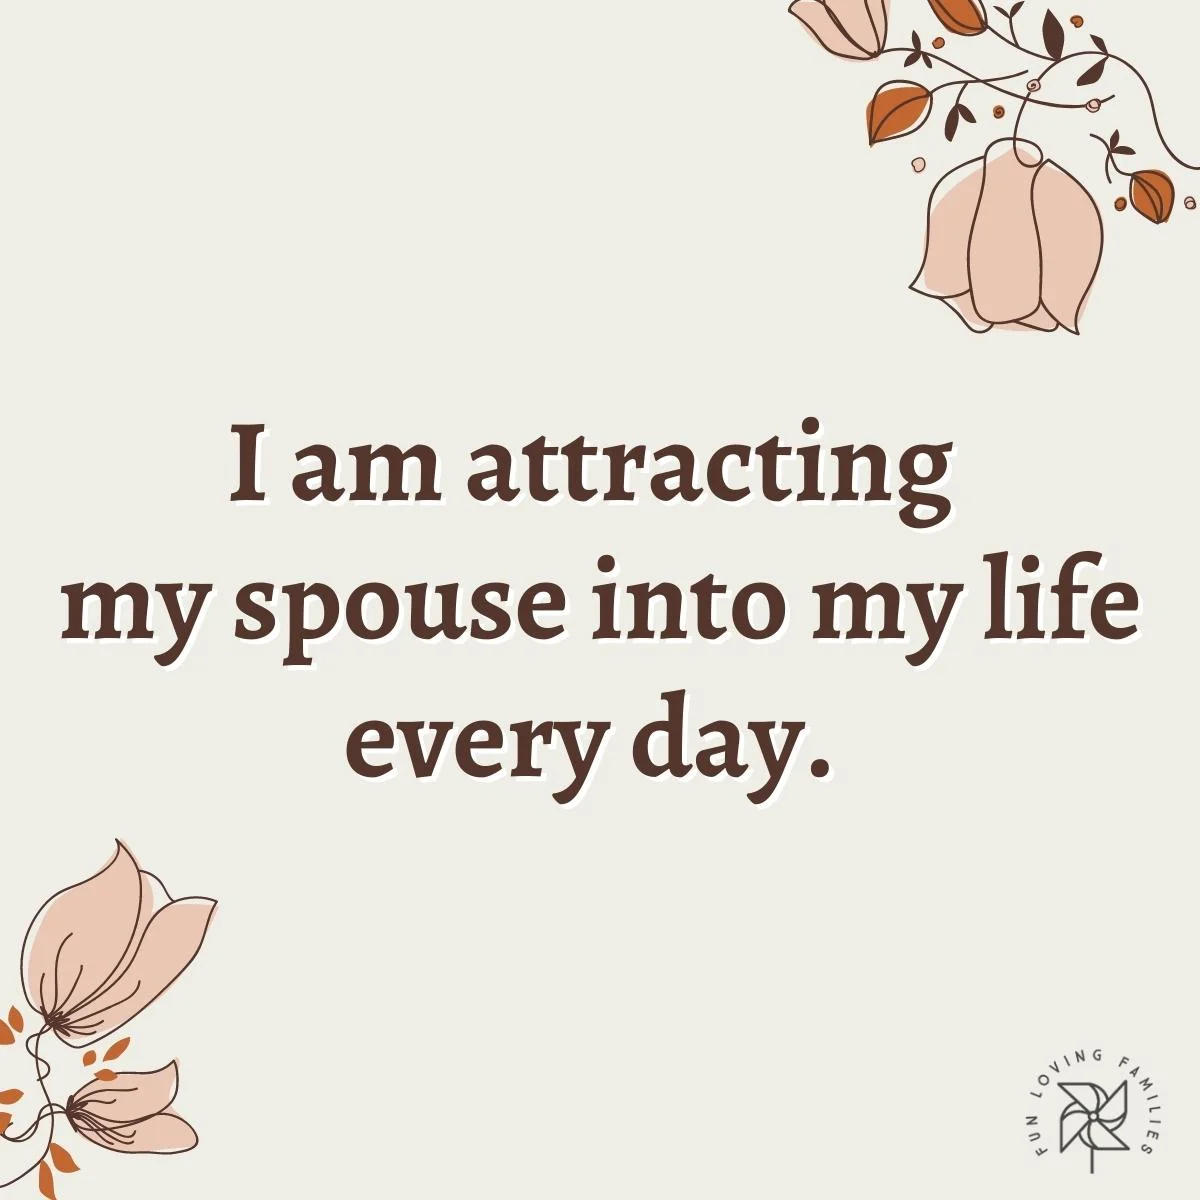 I am attracting my spouse into my life every day affirmation